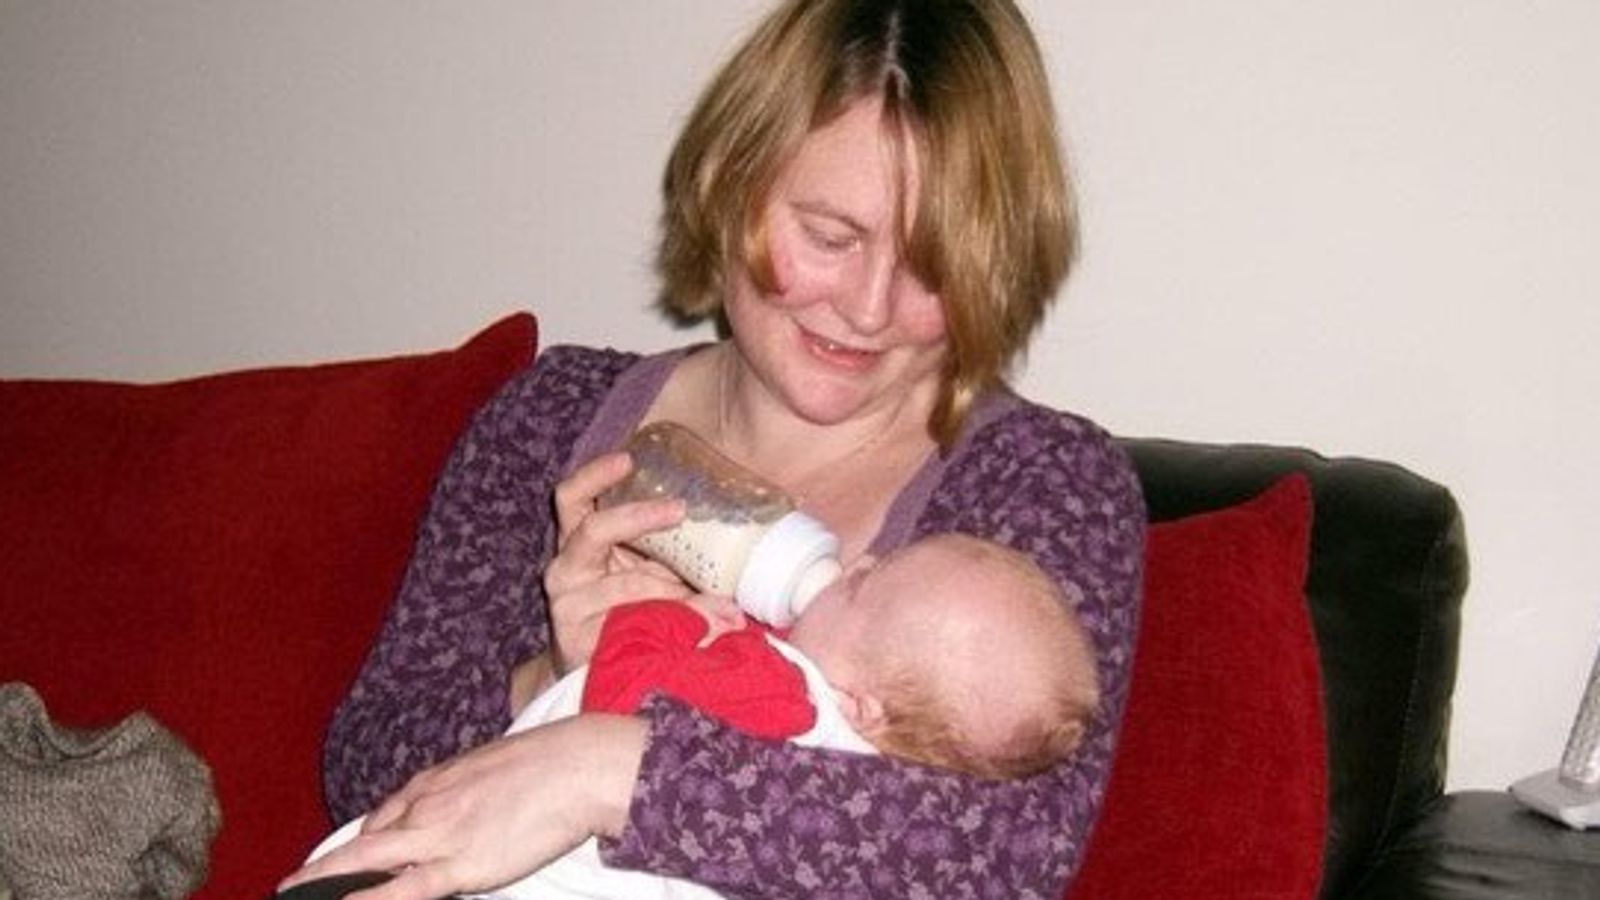 Mother left with life-long injuries after giving birth breaks 'silence' in bid to help others